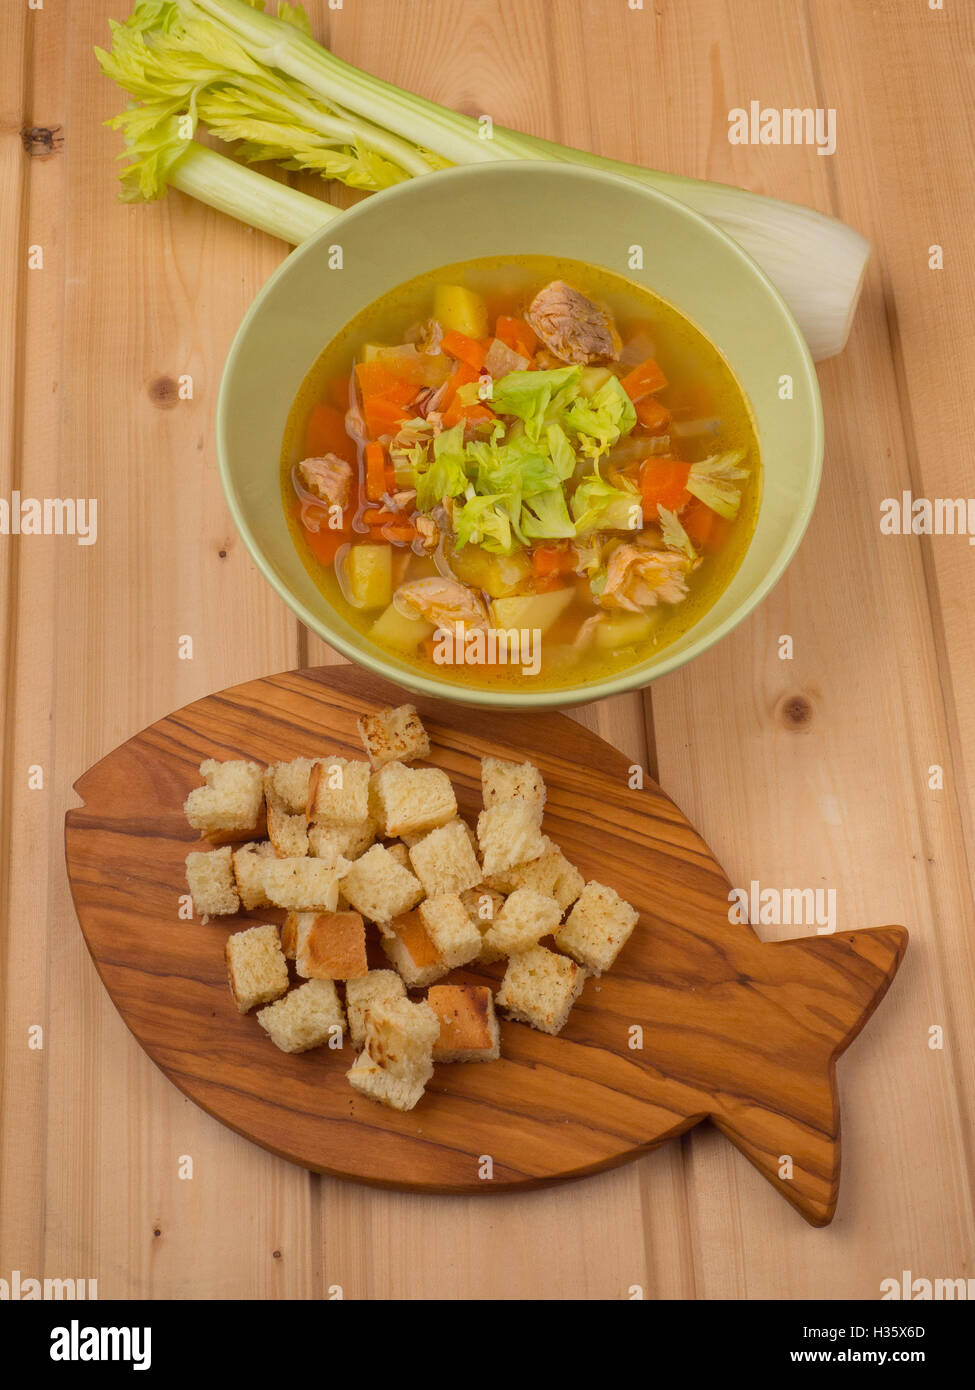 Salmon soup with croutons and celery Stock Photo